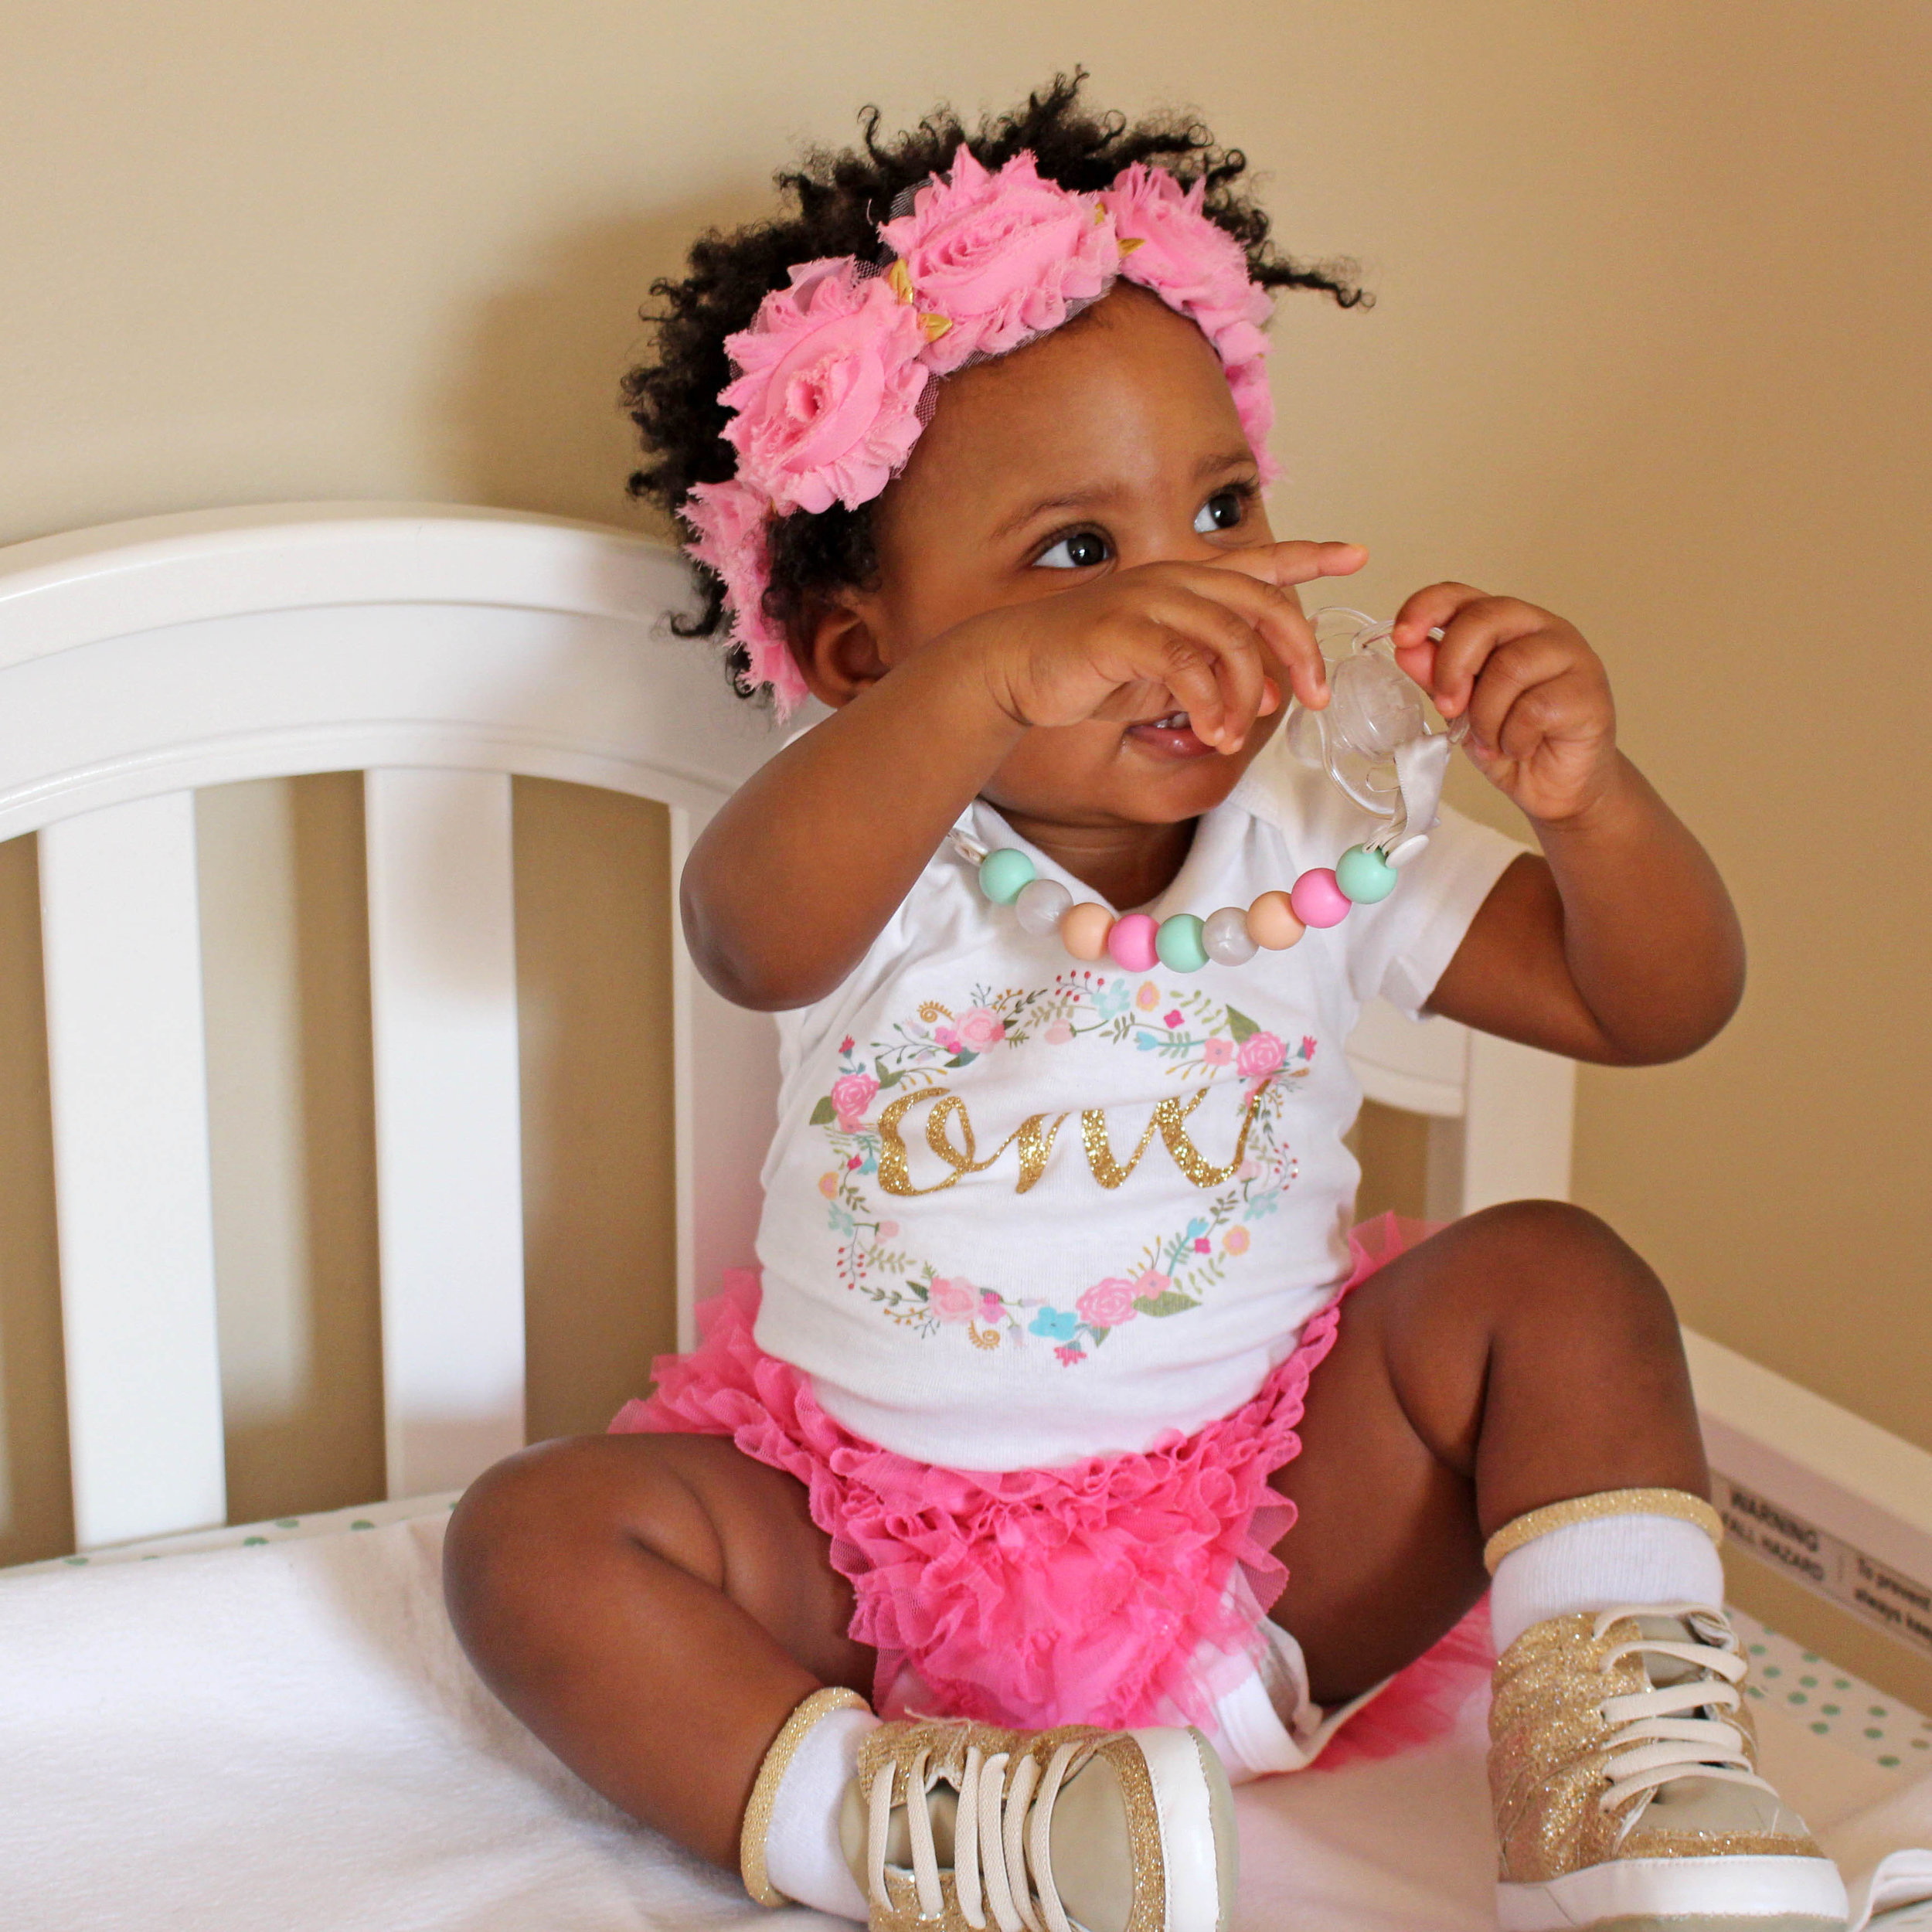  floral themed 1st bday - "one" bodysuit and flower crown | Pish Posh Perfect  